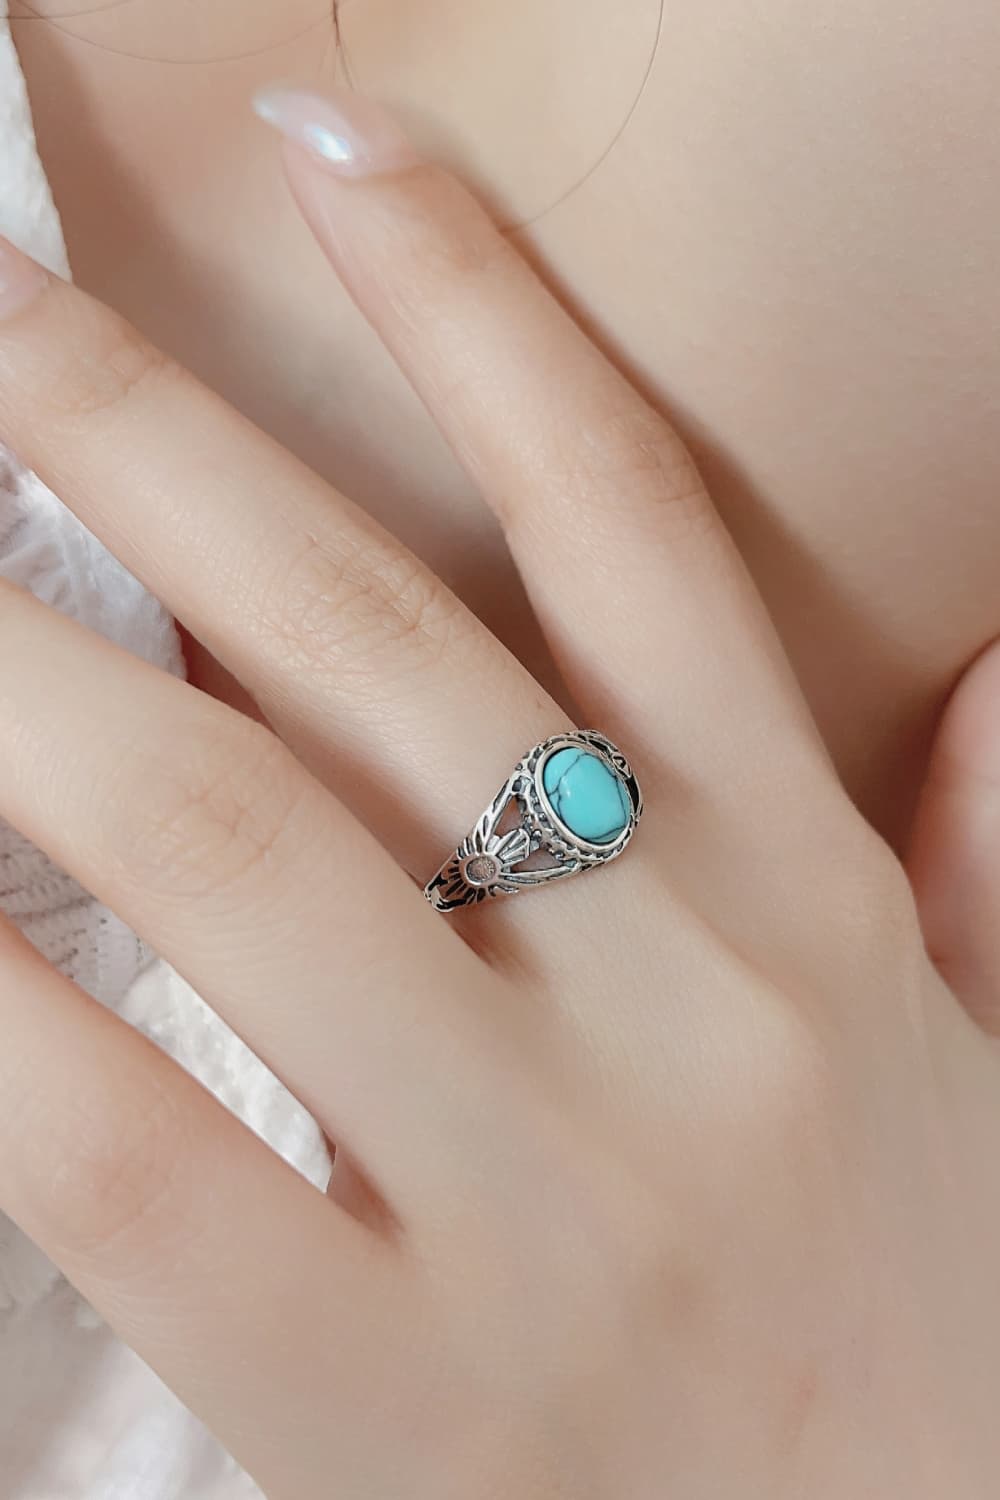 Turquoise 925 Sterling Silver Ring The Stout Steer